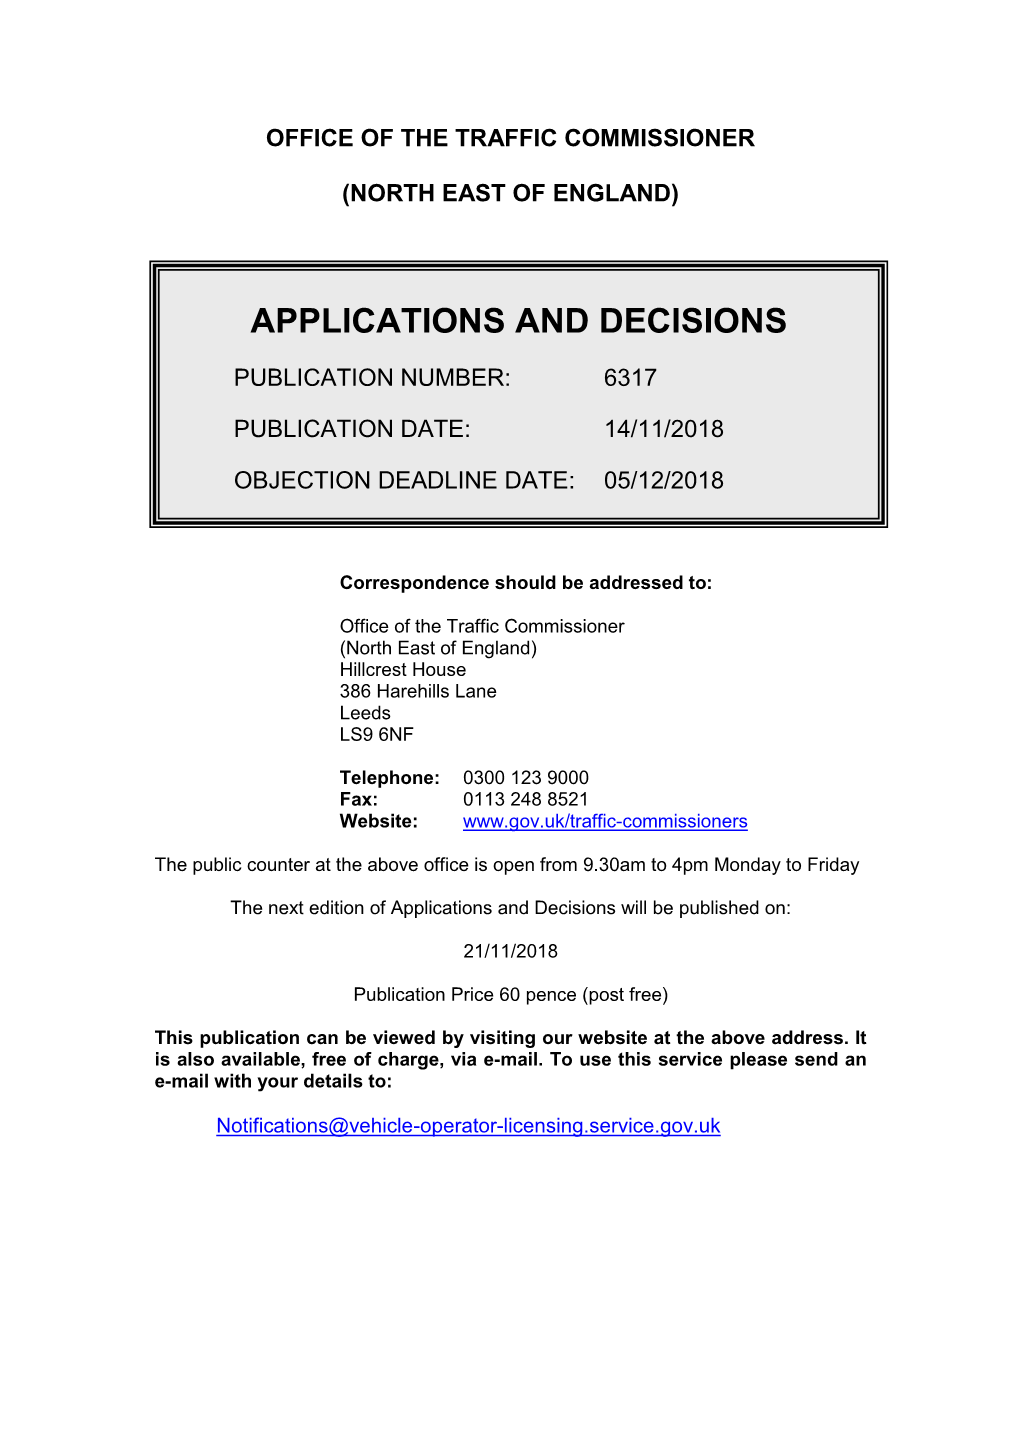 Applications and Decisions for the North East of England